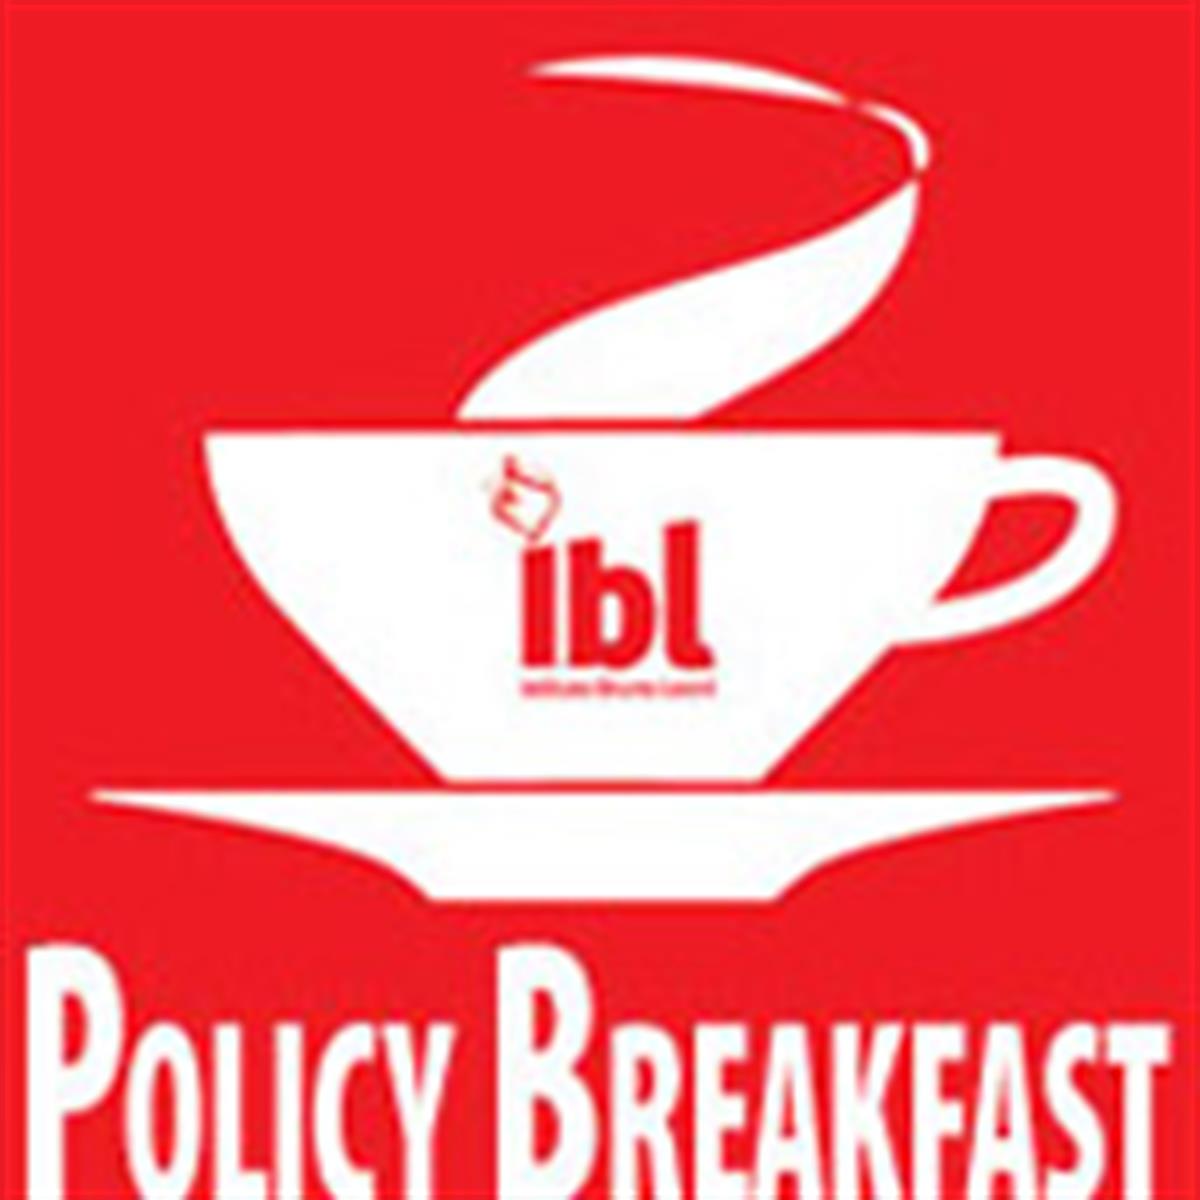 Policy Breakfast